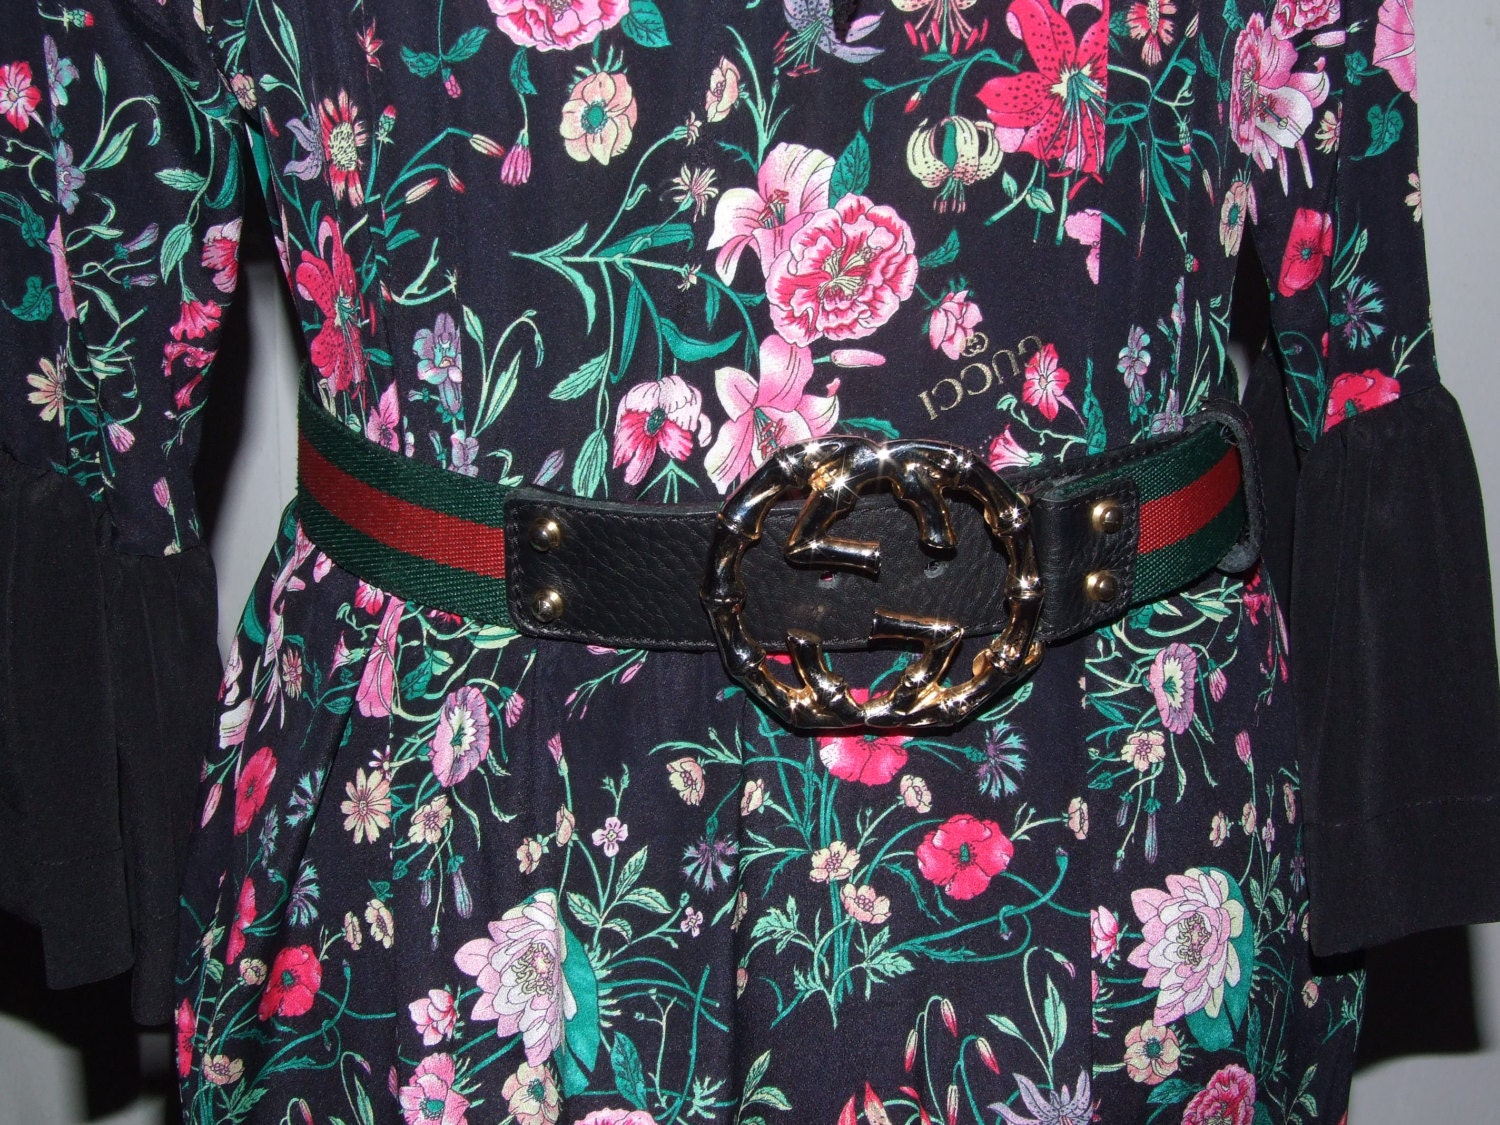 GUCCI Made in Italy Authentic Gold Buckle Belt//GUCCI Italy